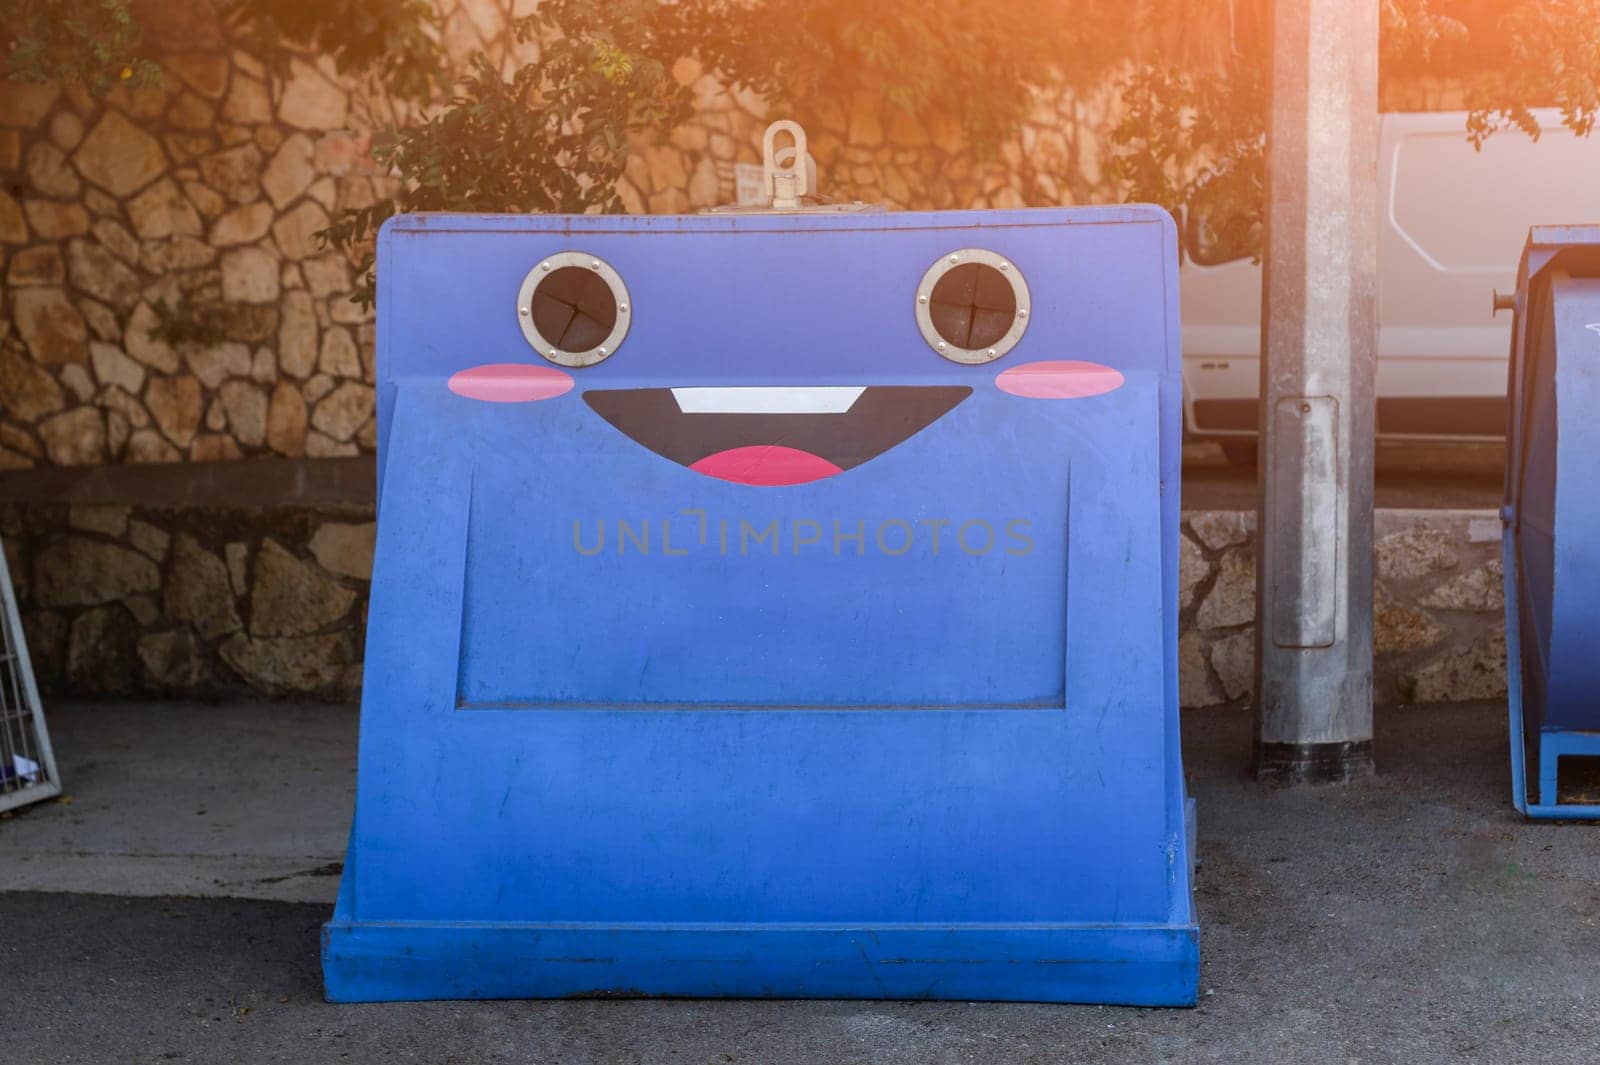 Funny trash can for plastic. differentiated garbage collection by Renisons